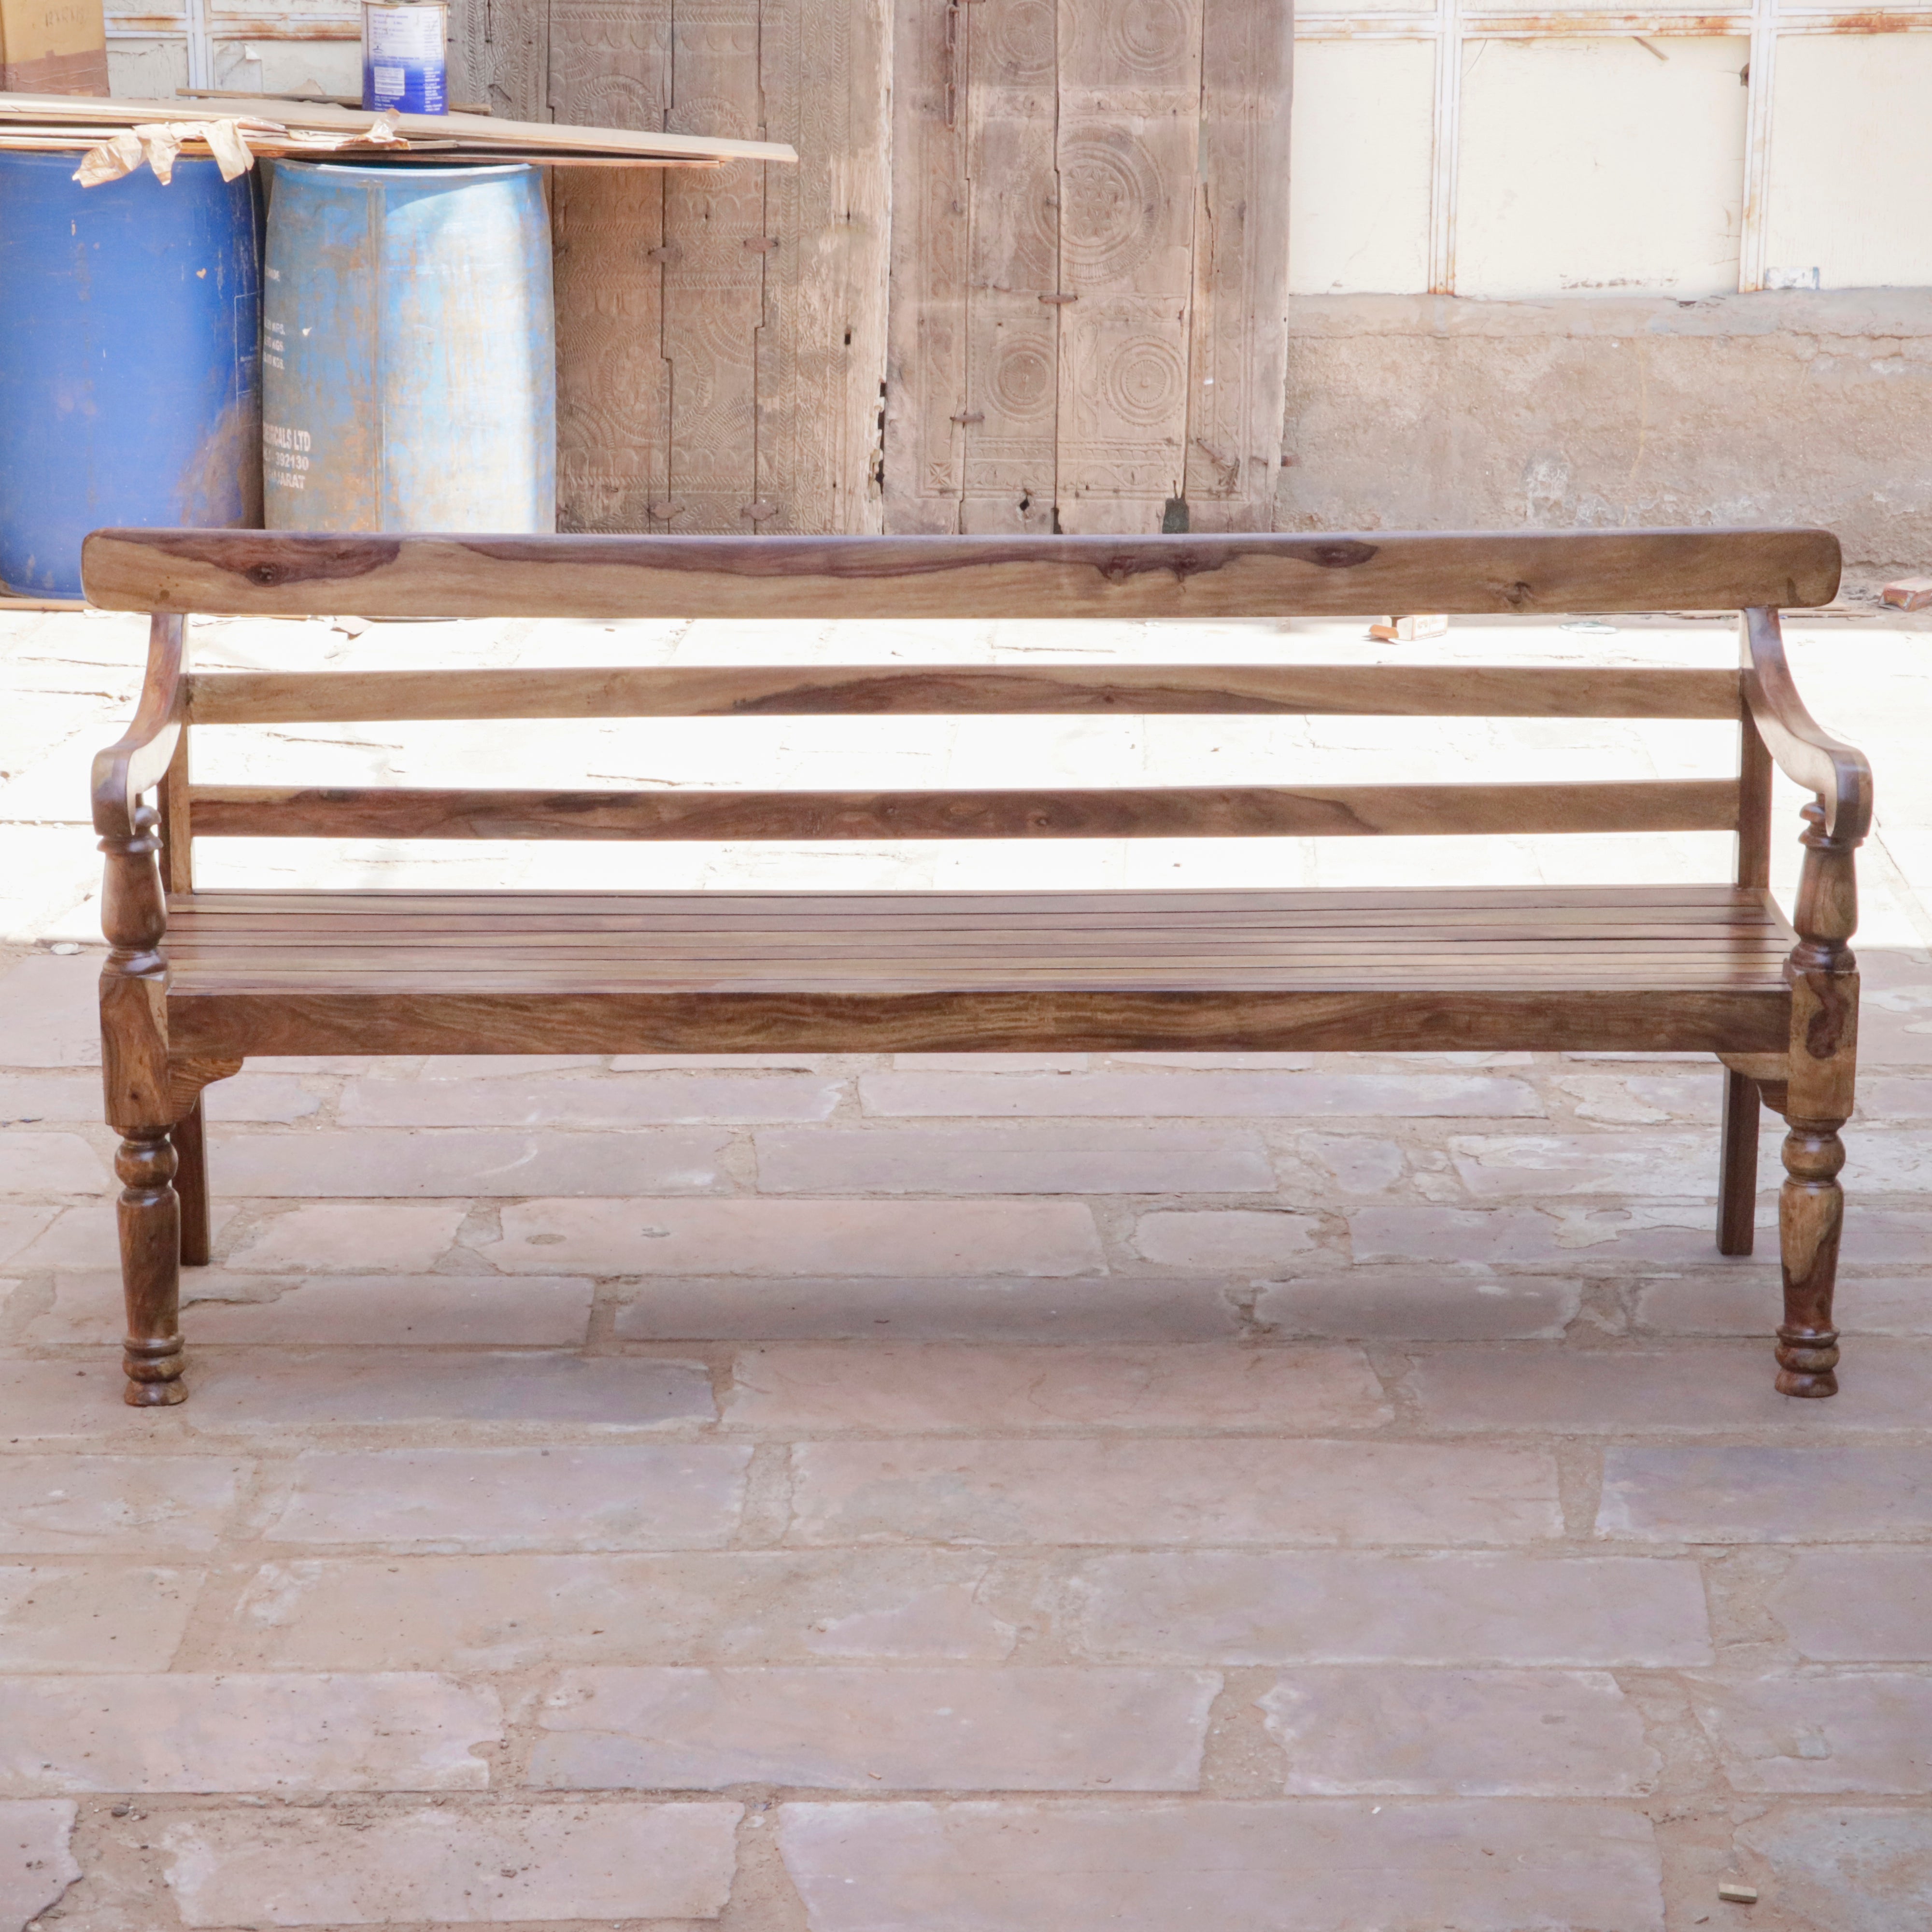 Antique Long Teak Finish Handcrafted Wooden Bench for Home Bench